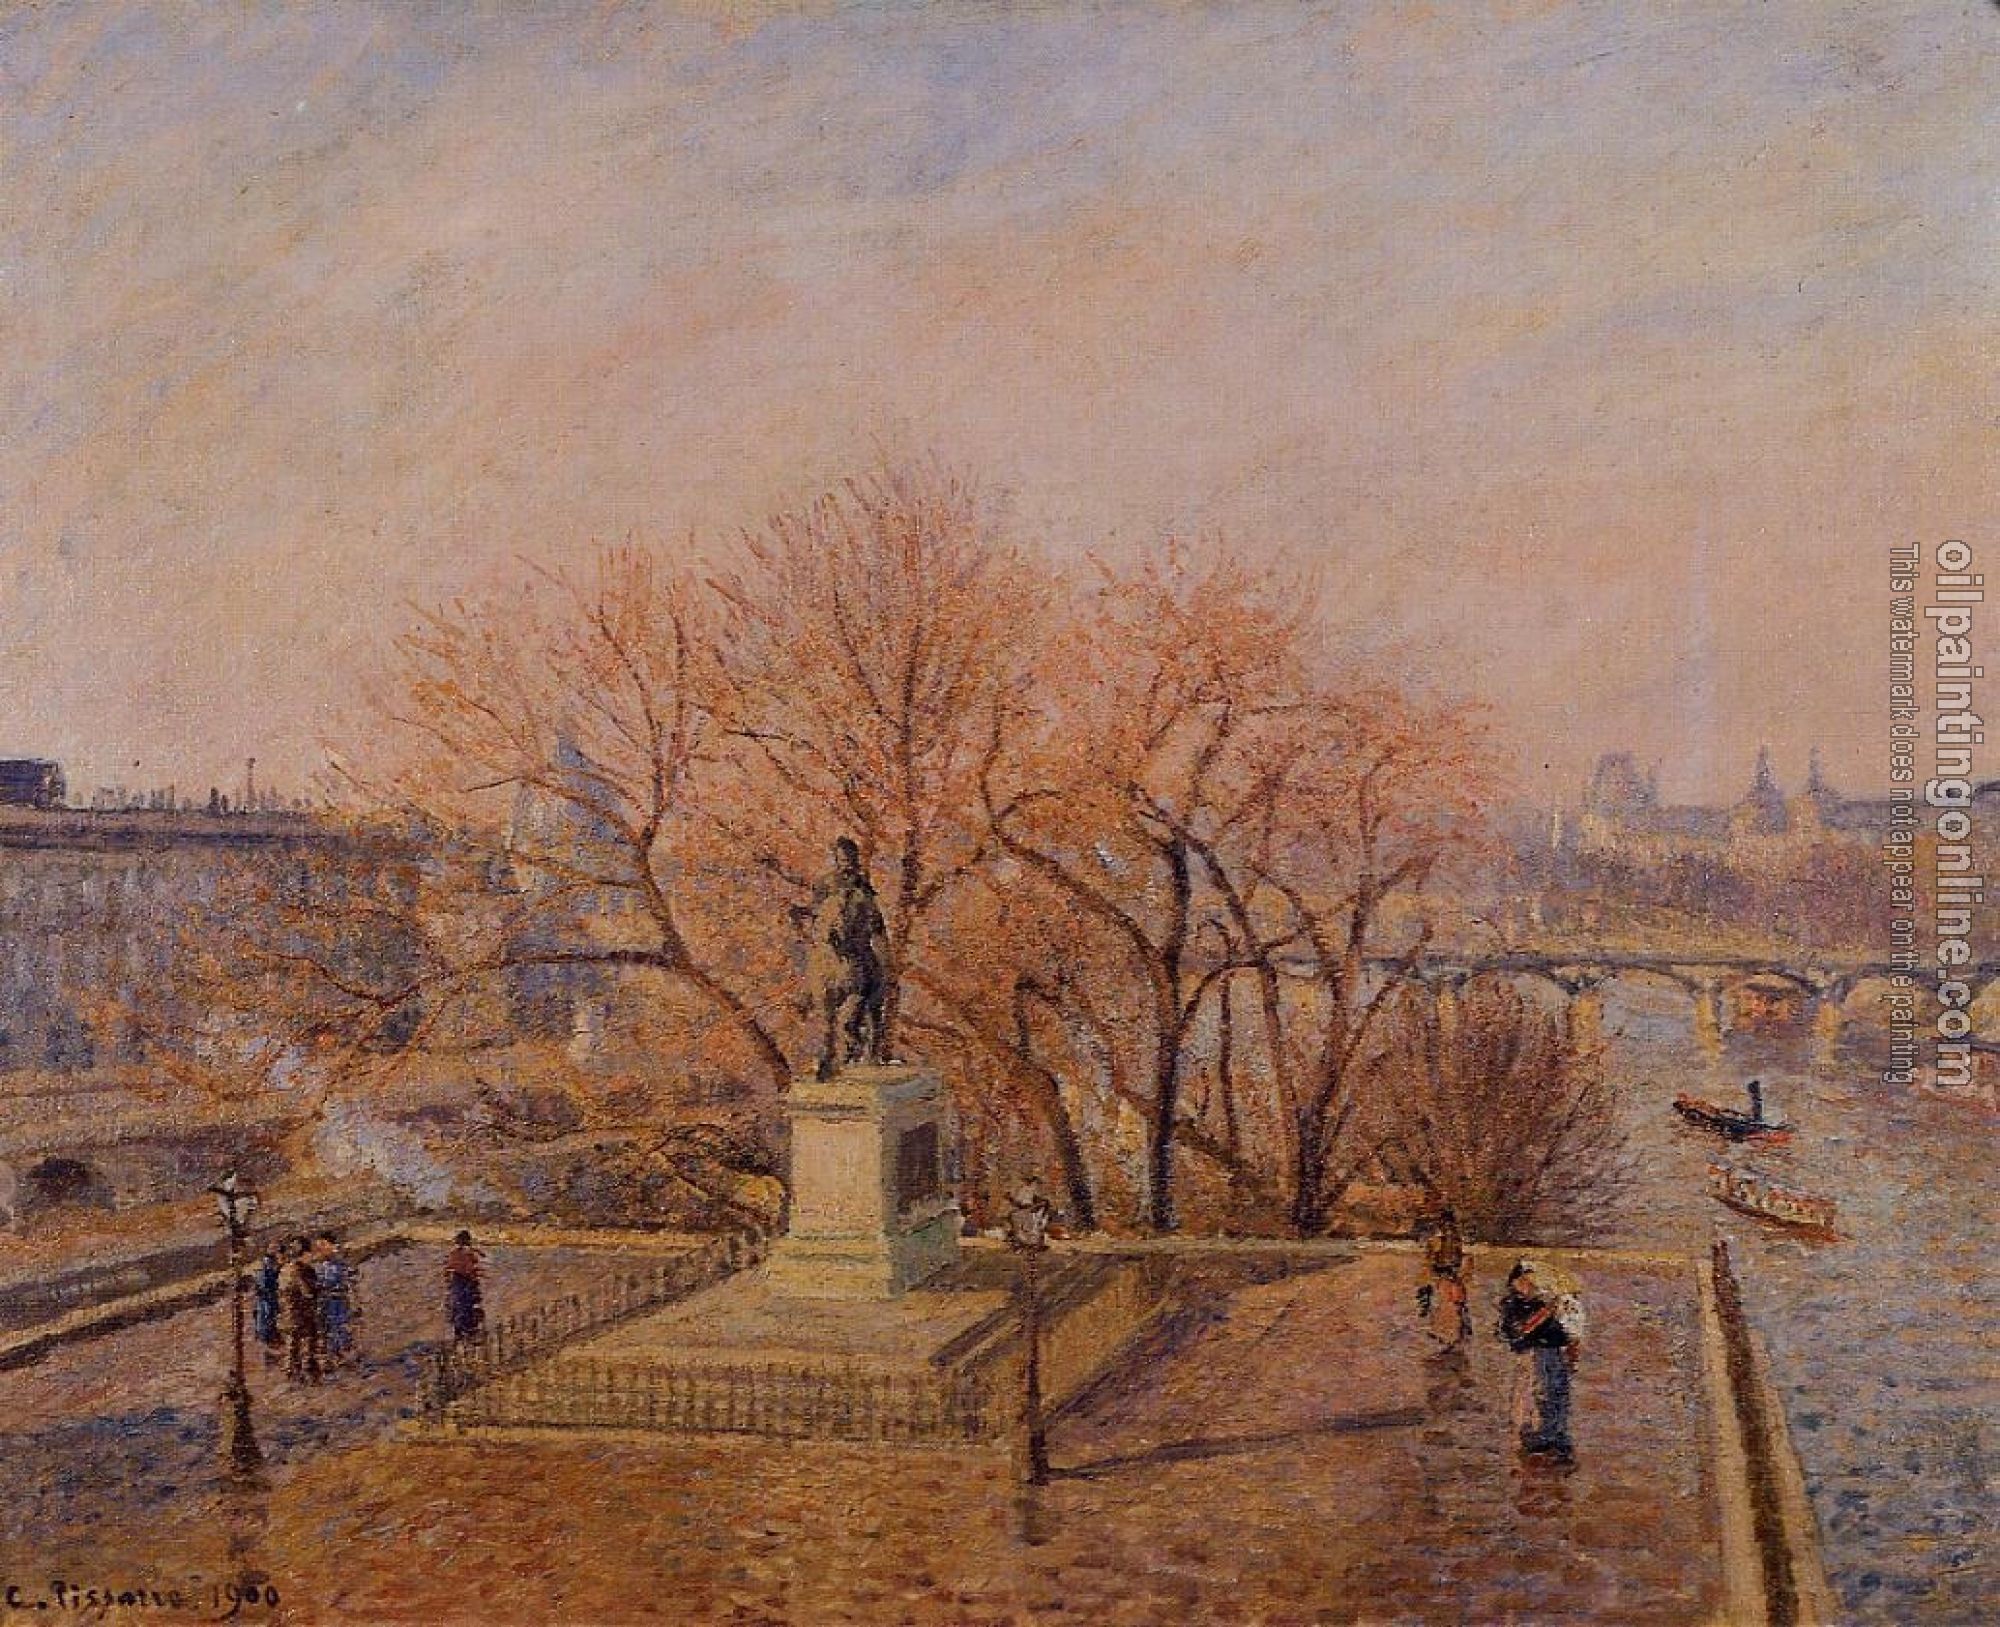 Pissarro, Camille - Pont-Neuf, the Statue of Henri IV, Sunny Weather